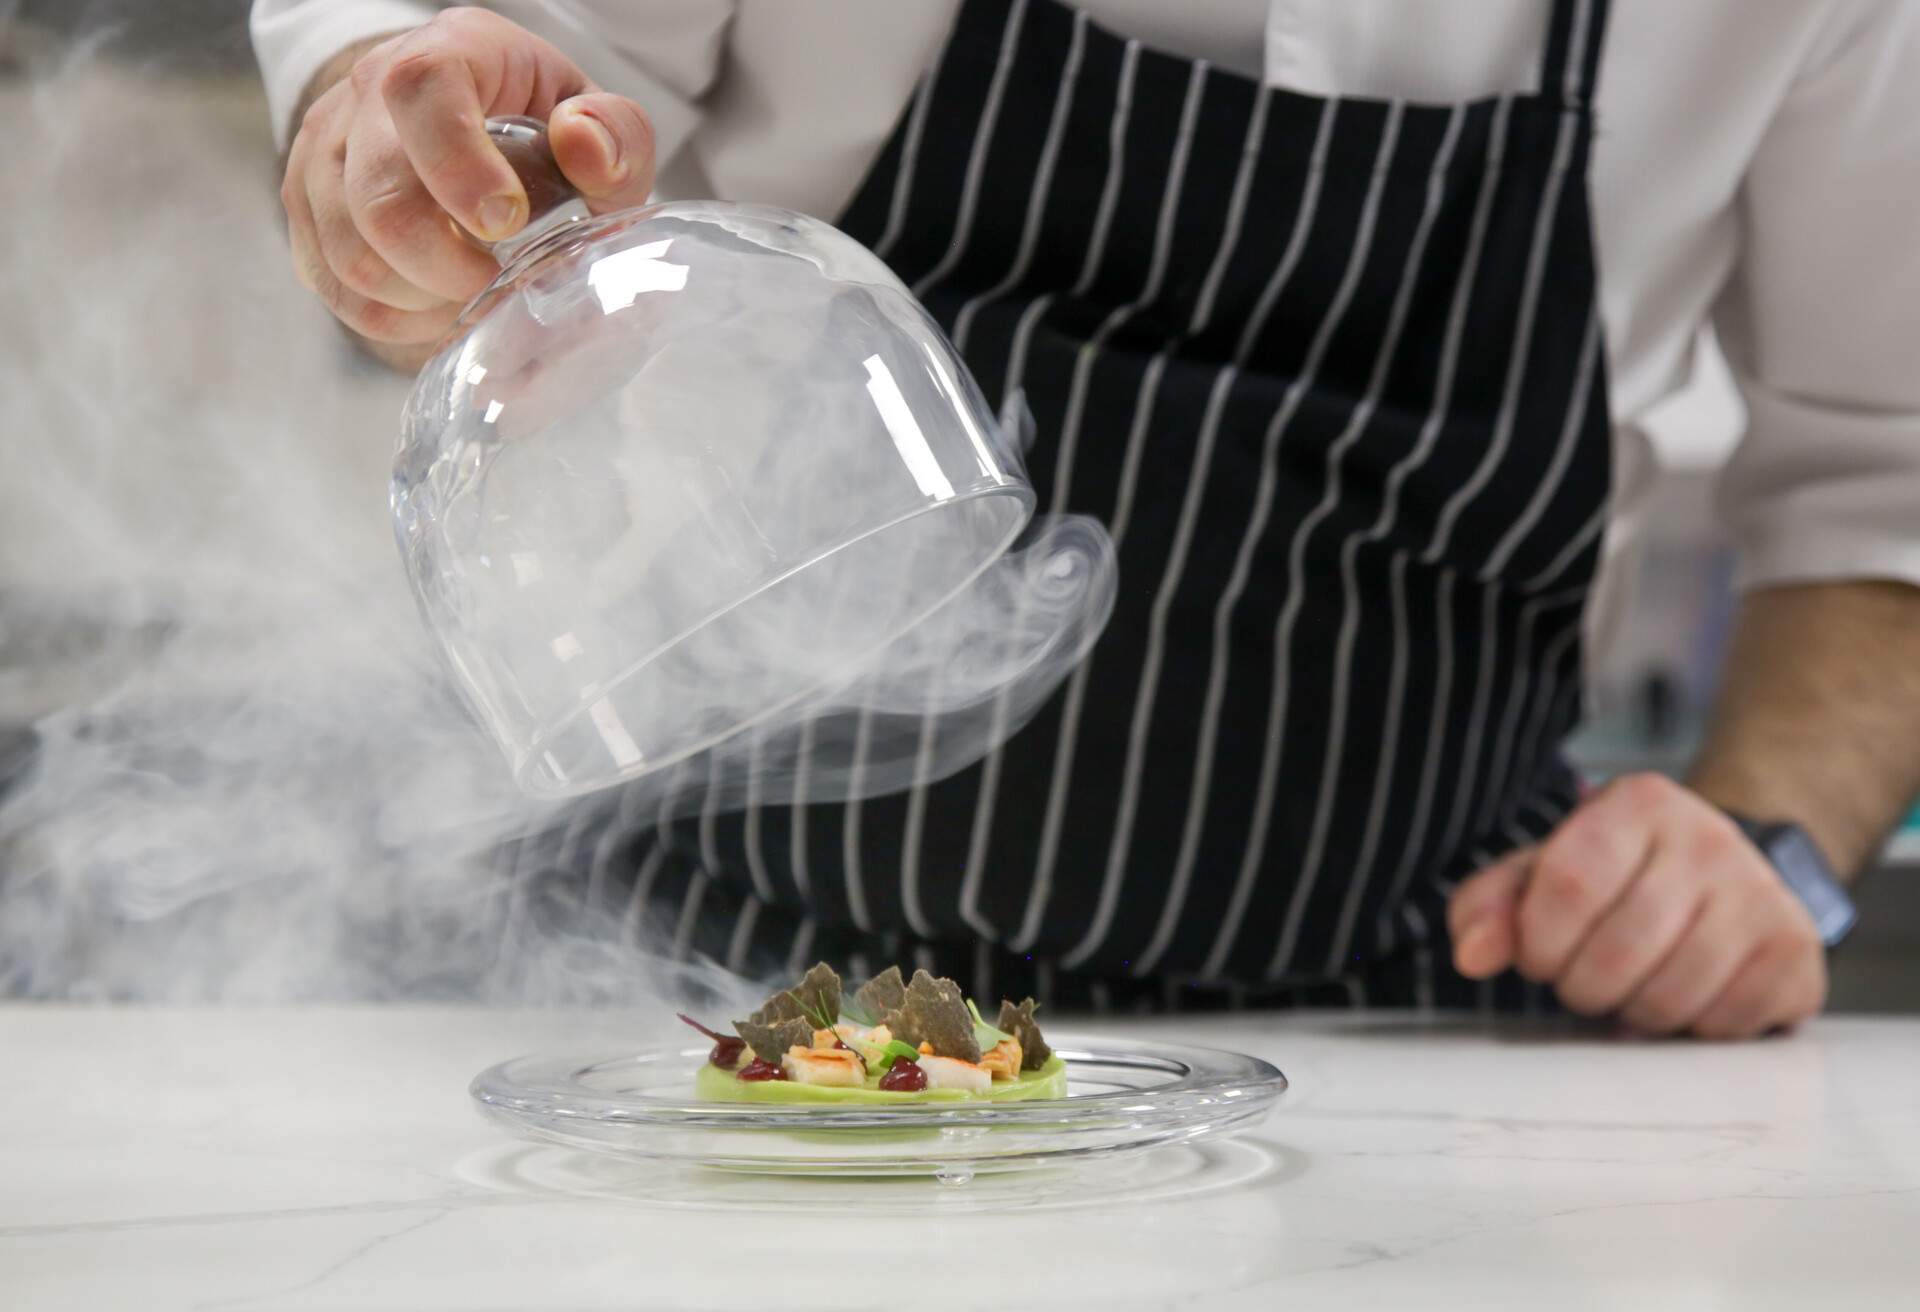 Chef's hand lifts up glass cloche from a plate with hot food and moving smoke at the restaurant.